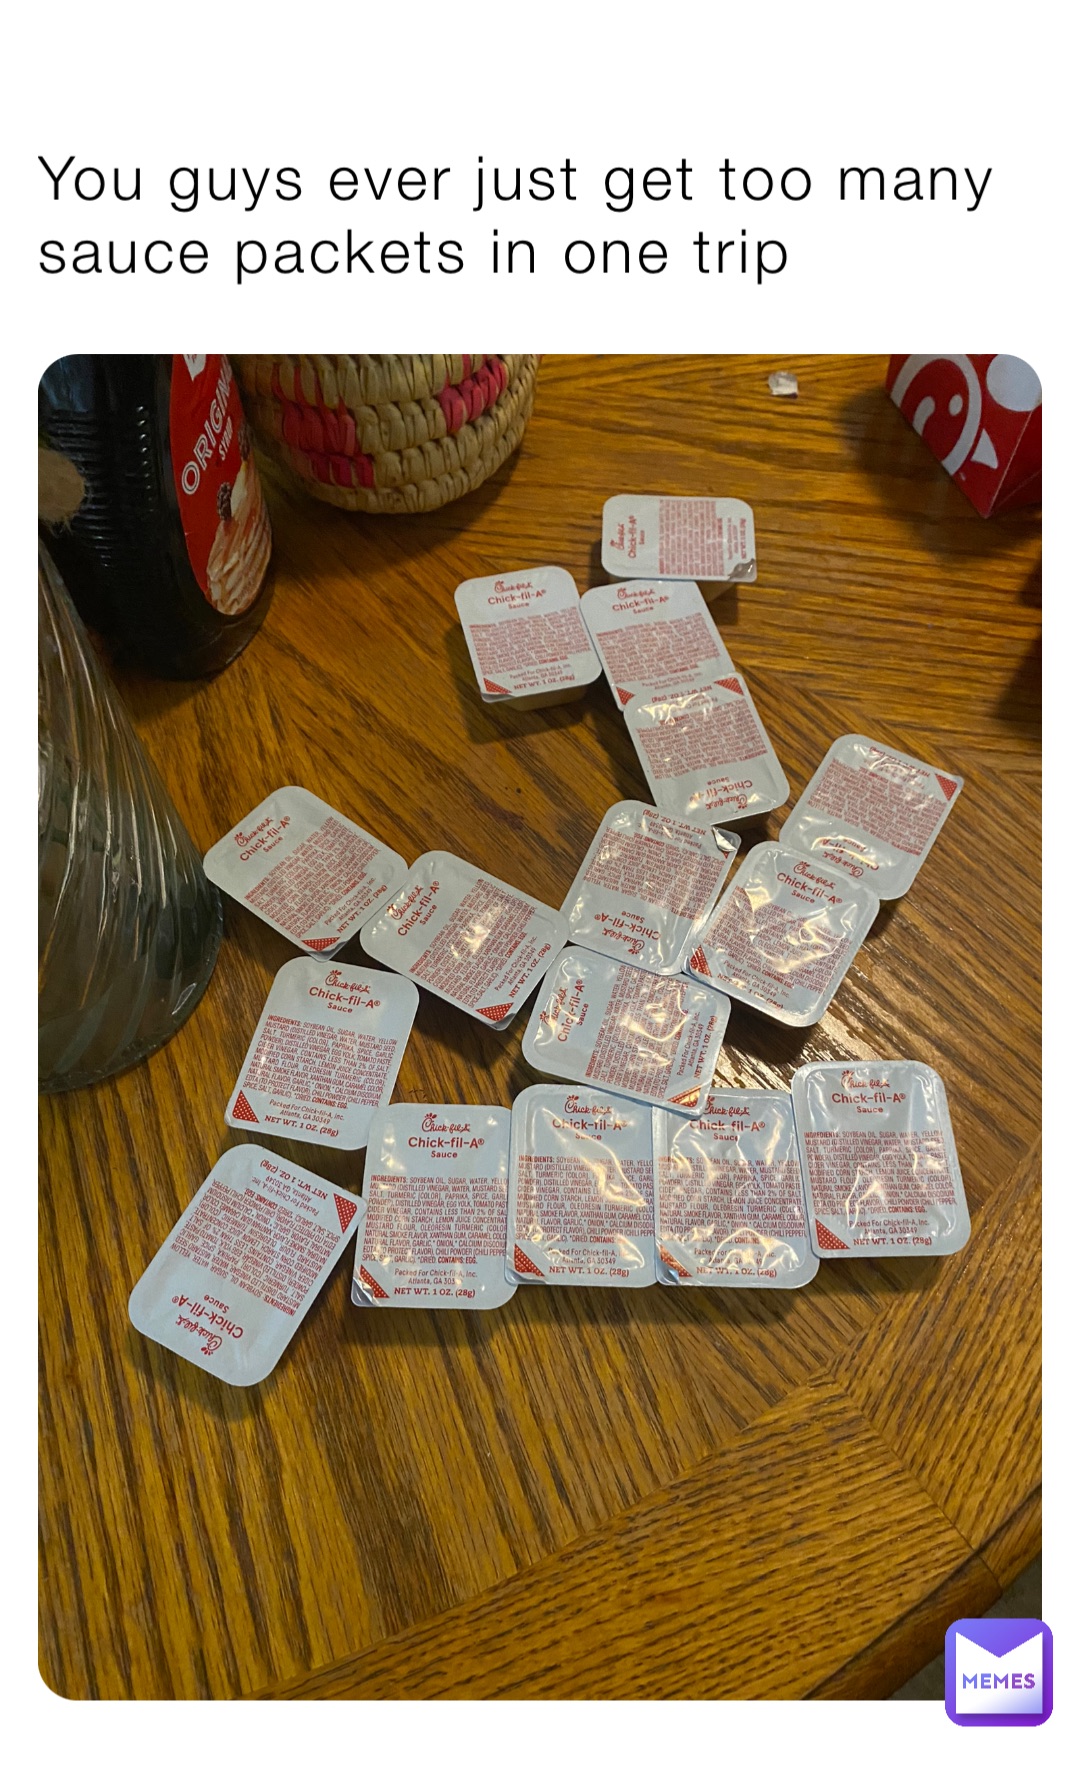 You guys ever just get too many sauce packets in one trip